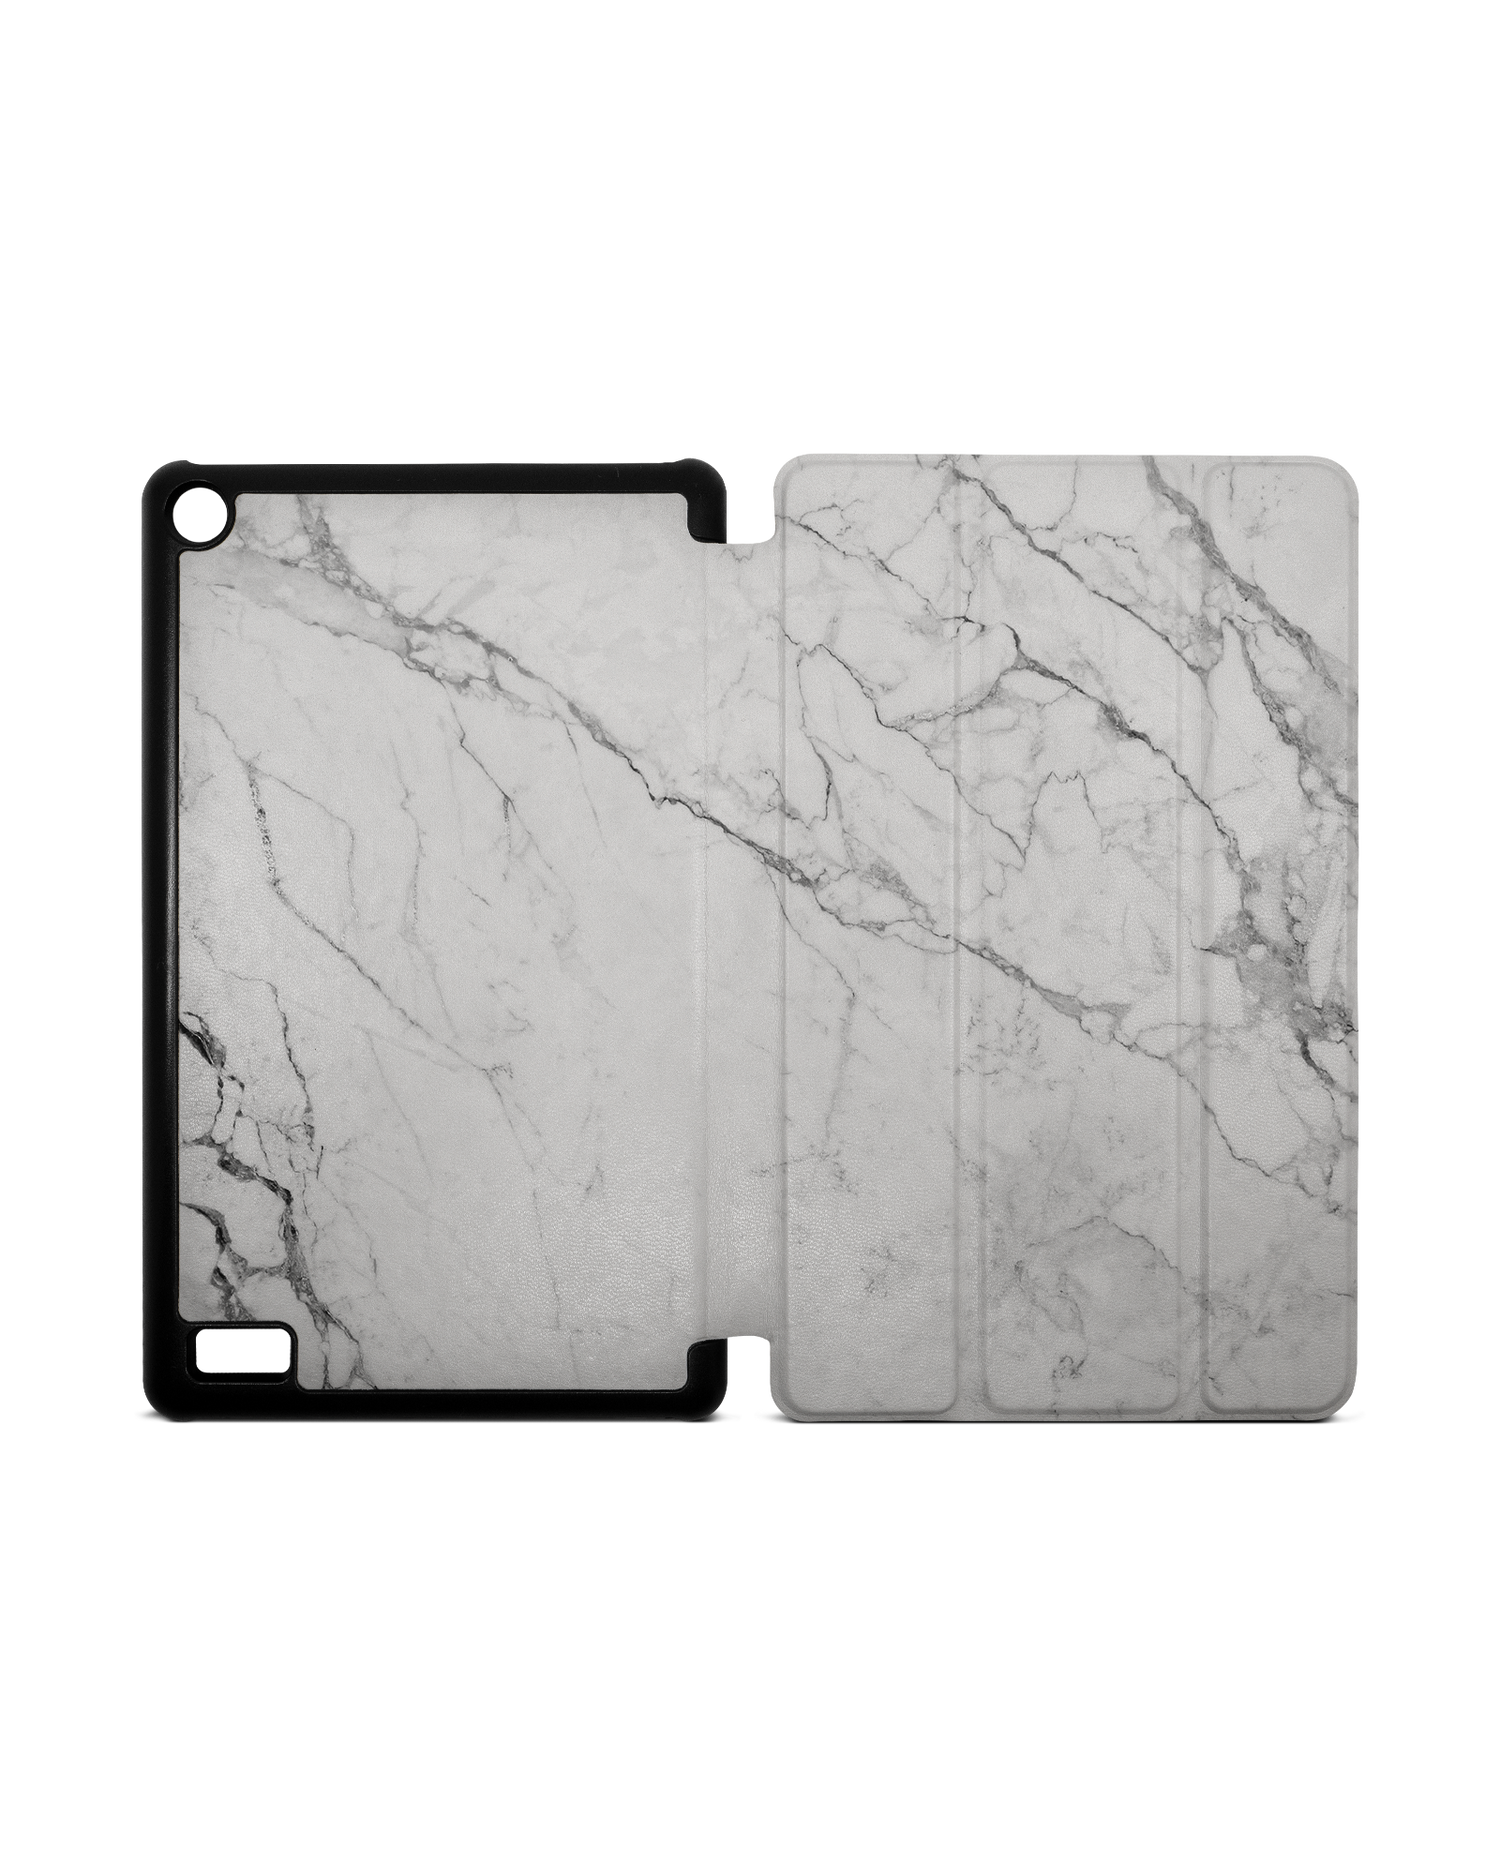 White Marble Tablet Smart Case for Amazon Fire 7: Opened